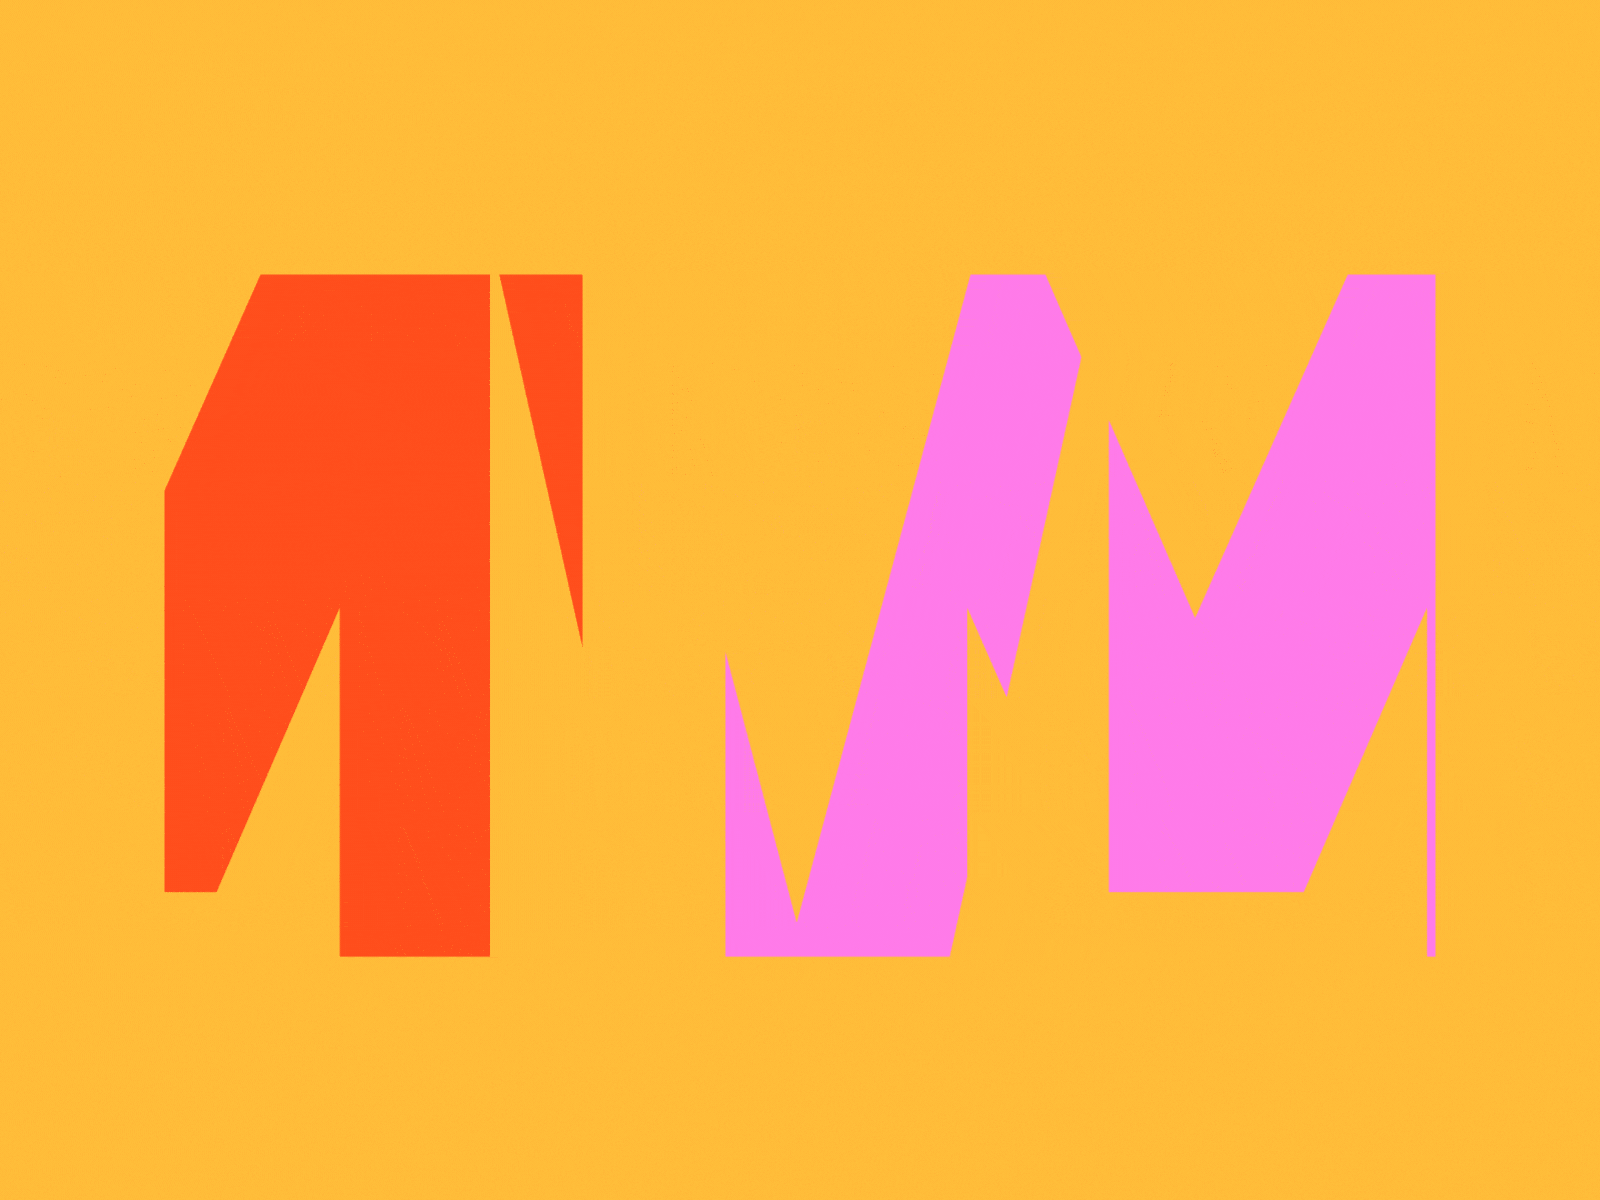 36 Days of Type - M 36 days of type 36daysoftype 36daysoftype08 36dot ae after effects animated type animation animography colors design kinetic kinetic type kinetic typography motion motion design motion graphic motion graphics type typography